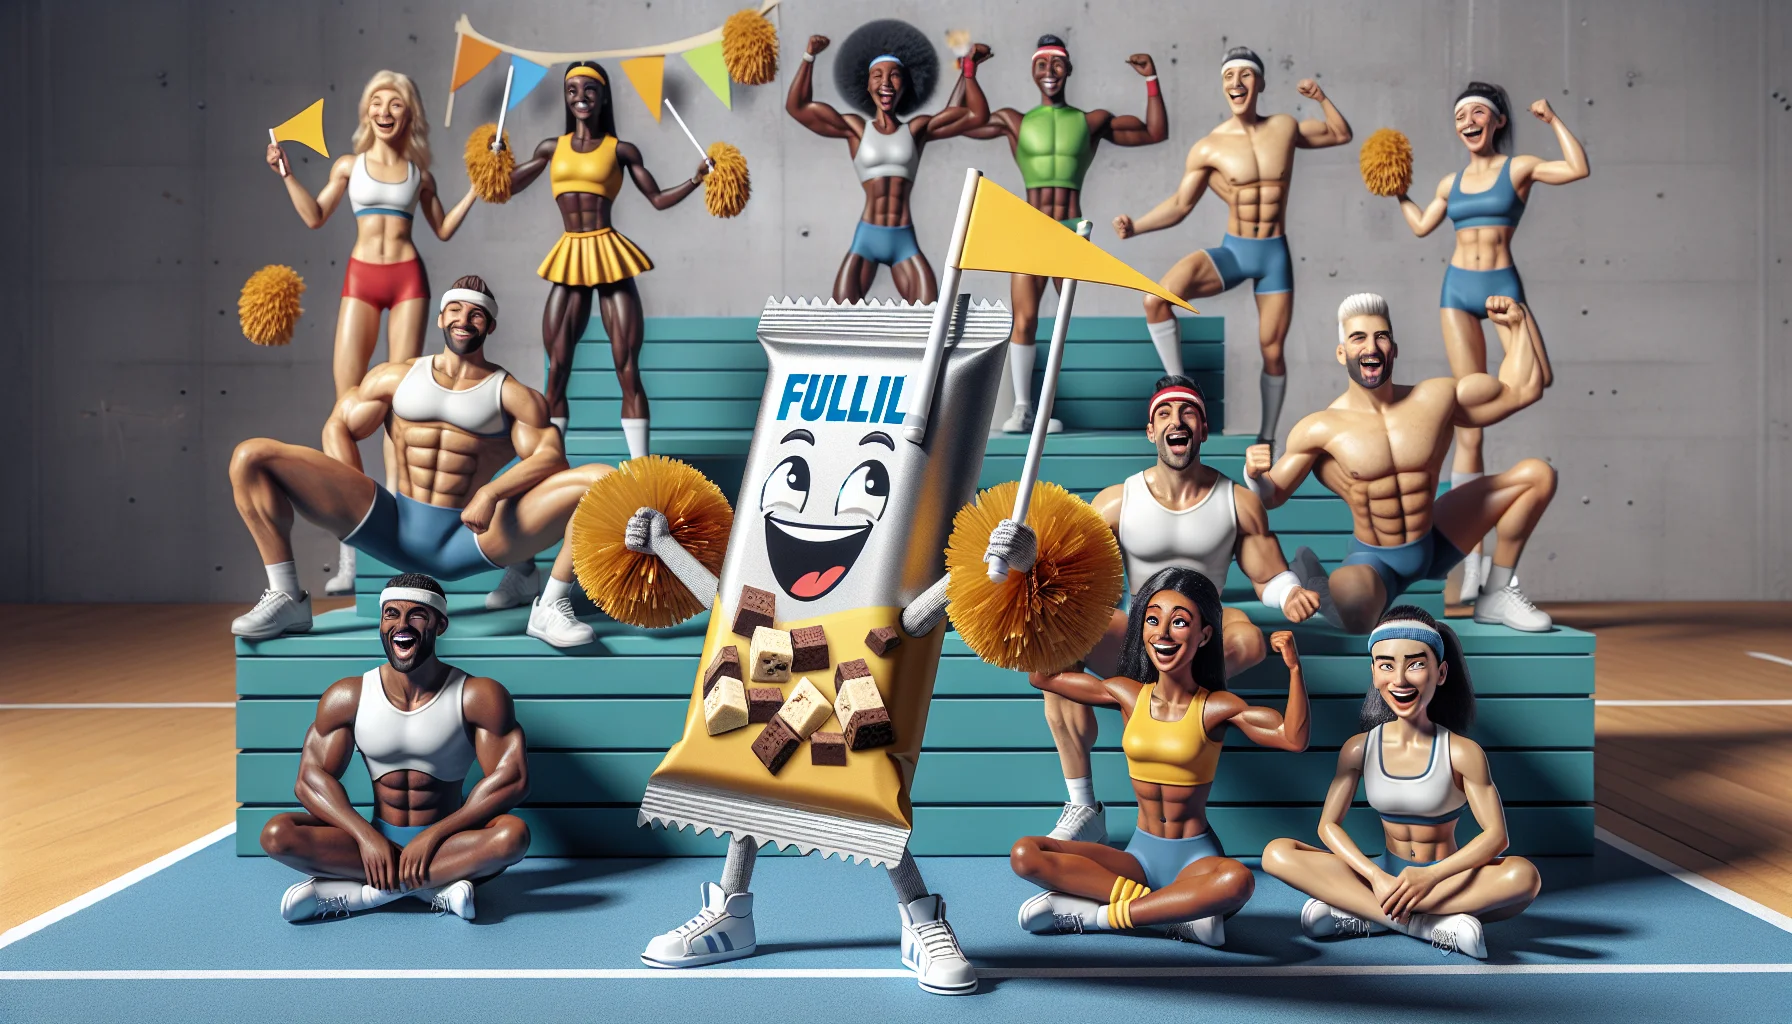 Imagine a humorous scene with a pile of FULFIL protein bars acting like cheerleaders, sporting little flags and pom-poms. These personified bars are cheering on a diverse group of athletes preparing for various sports in the background: a Caucasian female tennis player, a Black male gymnast, a Hispanic female swimmer, a Middle-Eastern male soccer player, a South Asian female cyclist, and a White male hurdler. They are all excited, ready to enhance their performance with these supplements, inciting feelings of aspiration and amusement.